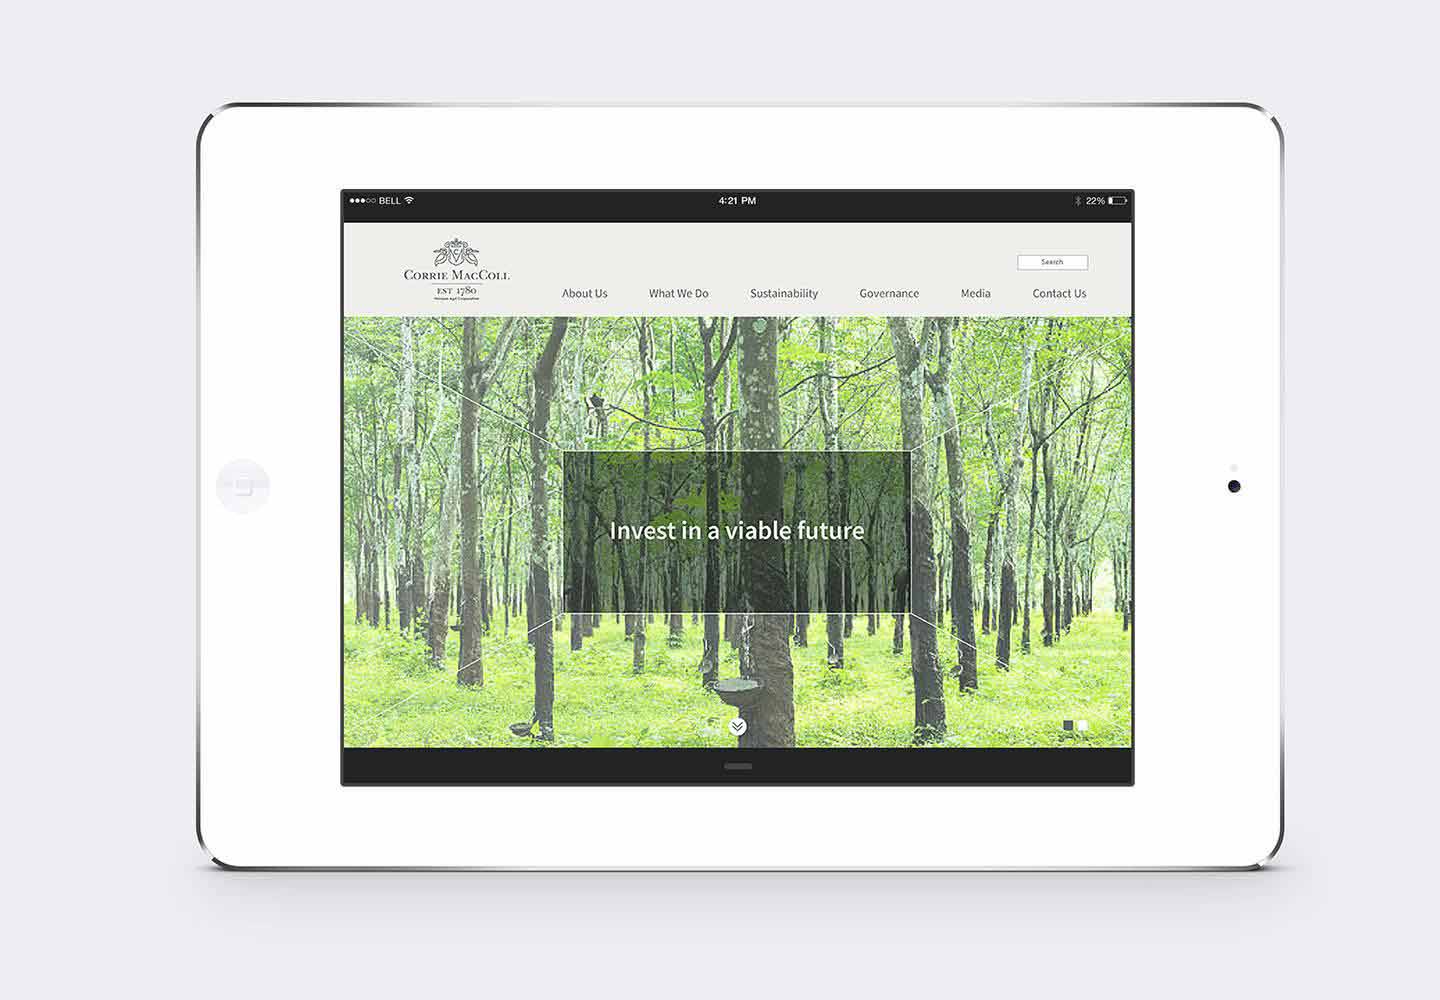 Brand Consultancy in Agriculture Industry. Website Design for Corrie MacColl